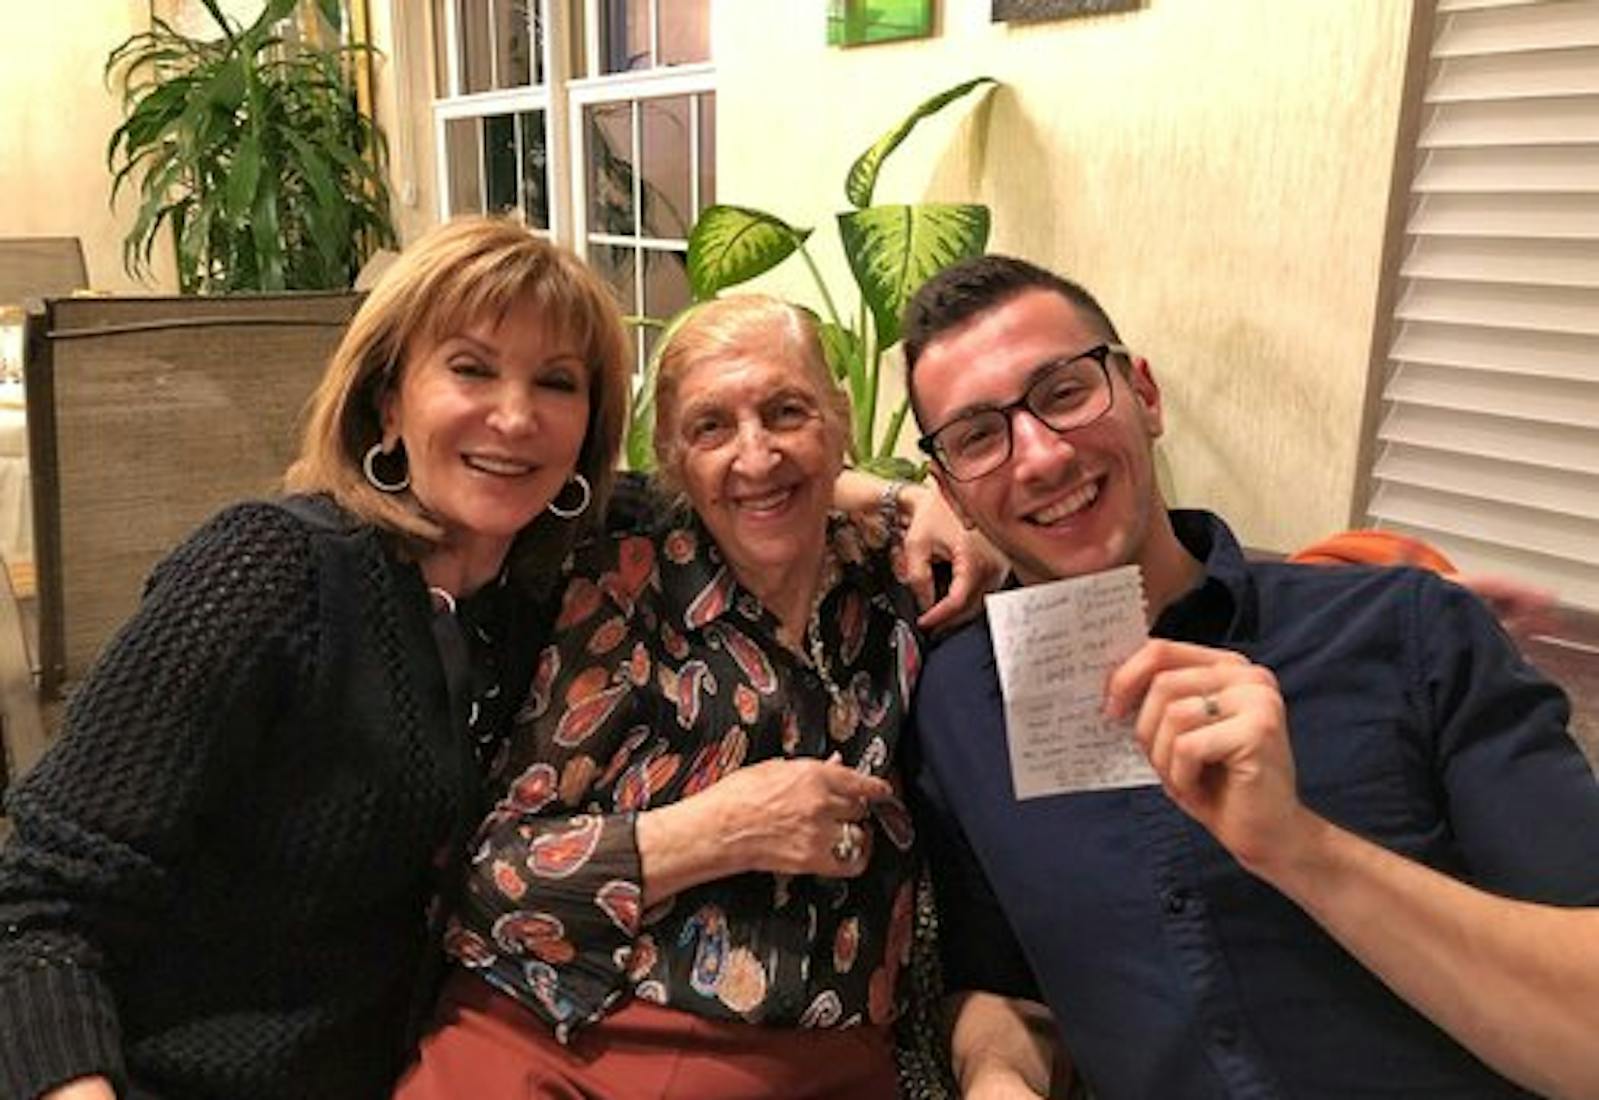 Jake (right) with his mother-in-law Robina (left) and Alex’s great-aunt Doris (center) at their joint family seder with the hadji bada recipe. 